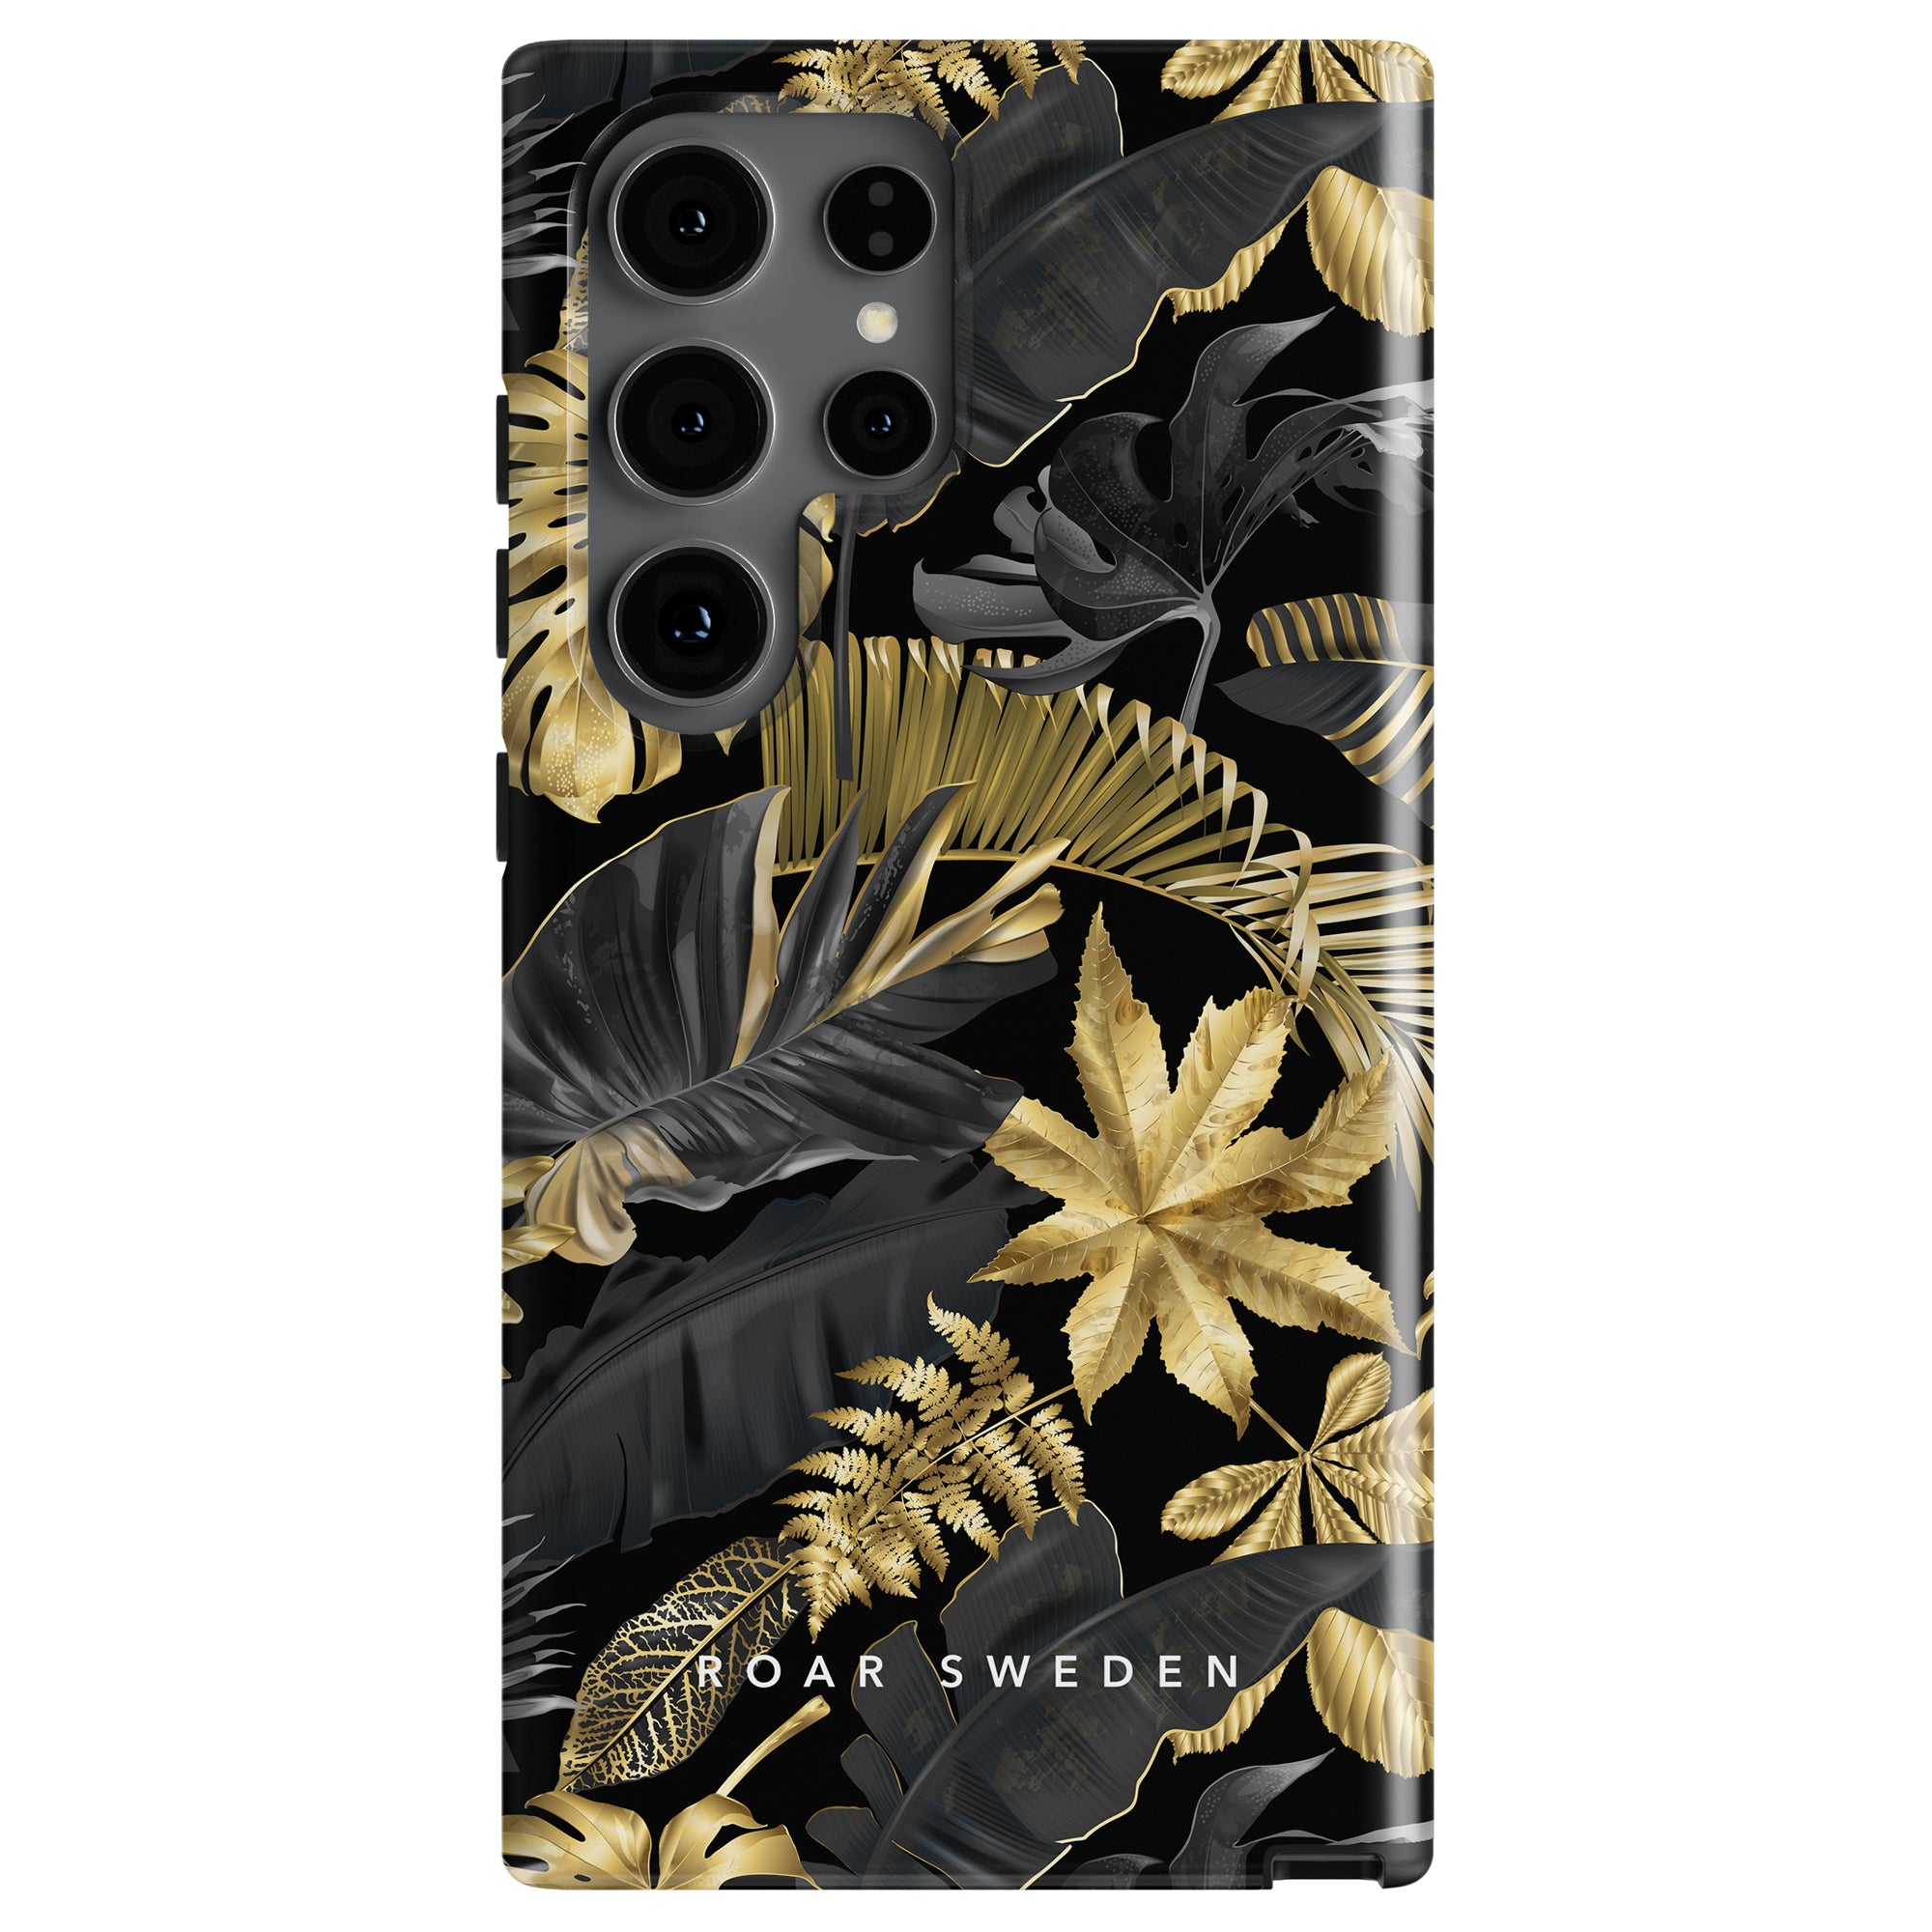 Smartphone with a black and gold tropical leaf patterned case, known as the Botanic Gold - Tough case, featuring the text "ROAR SWEDEN" at the bottom for extra flair.